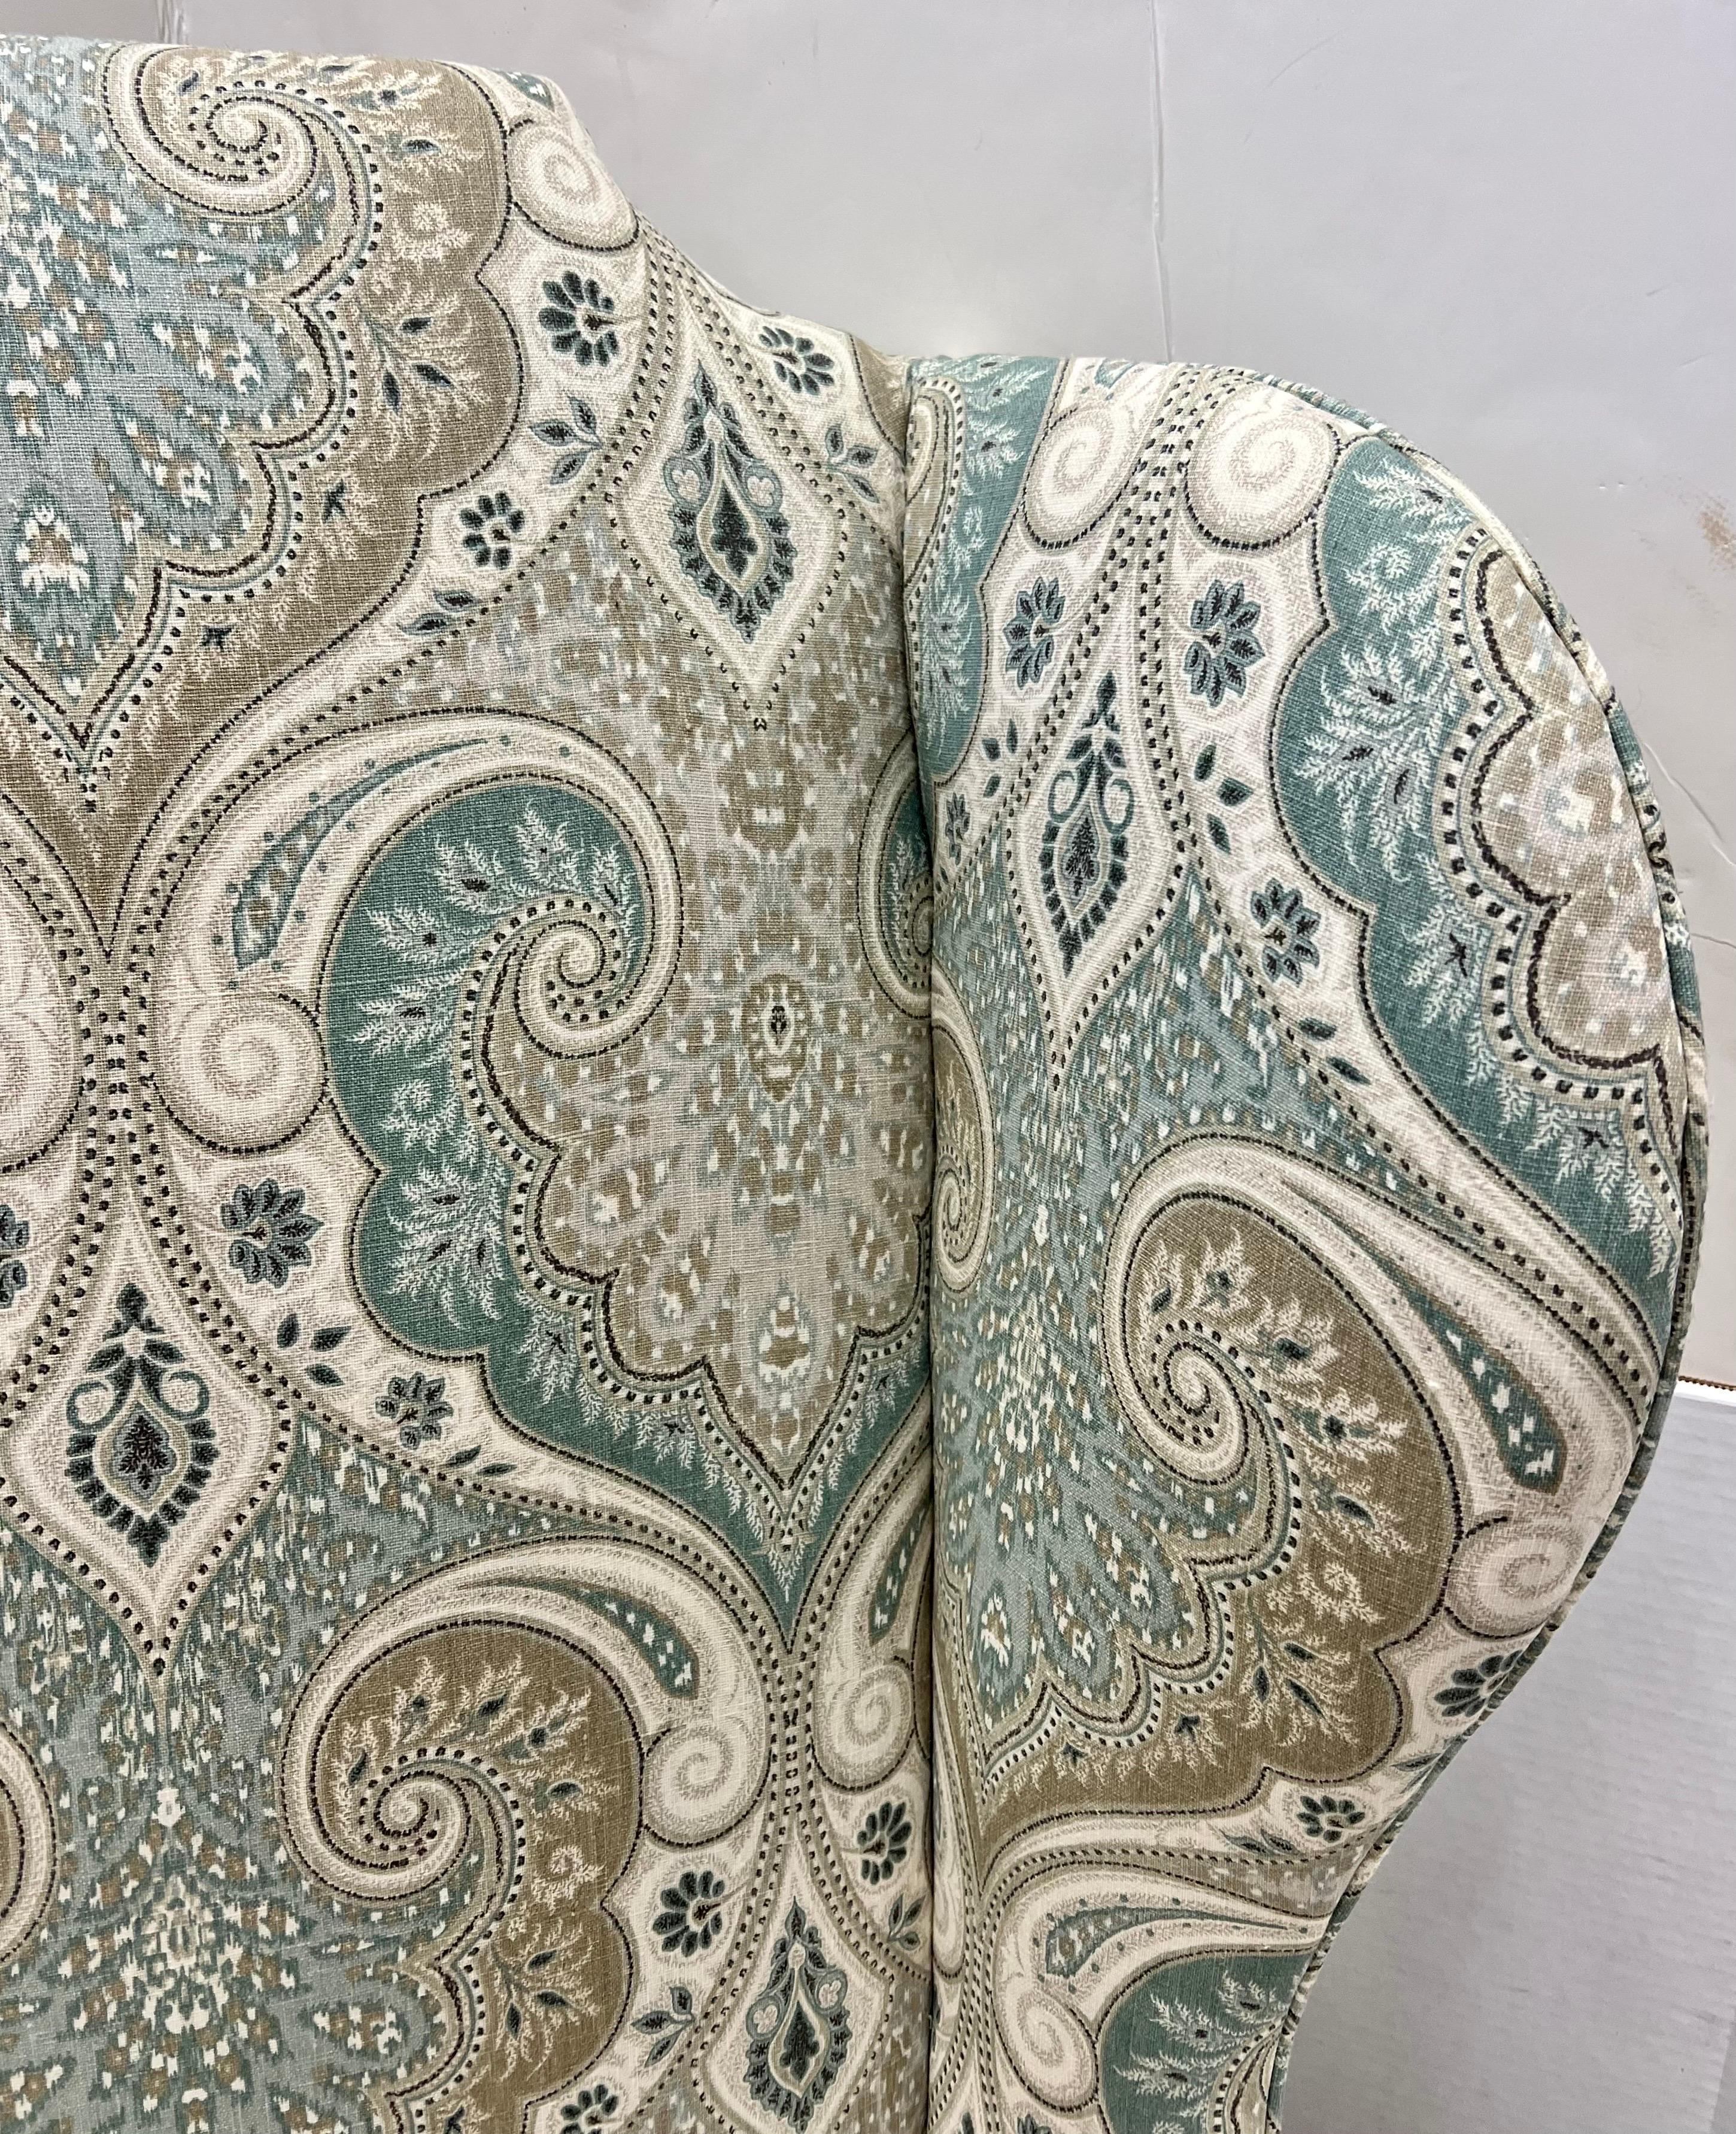 Stunning vintage tall wingback chair as it stands taller than most. Recently upholstered in a luxurious Scalamandre paisley fabric which is a showstopper. A great chair to read in or entertain guests. Fabric colors are blue, green and